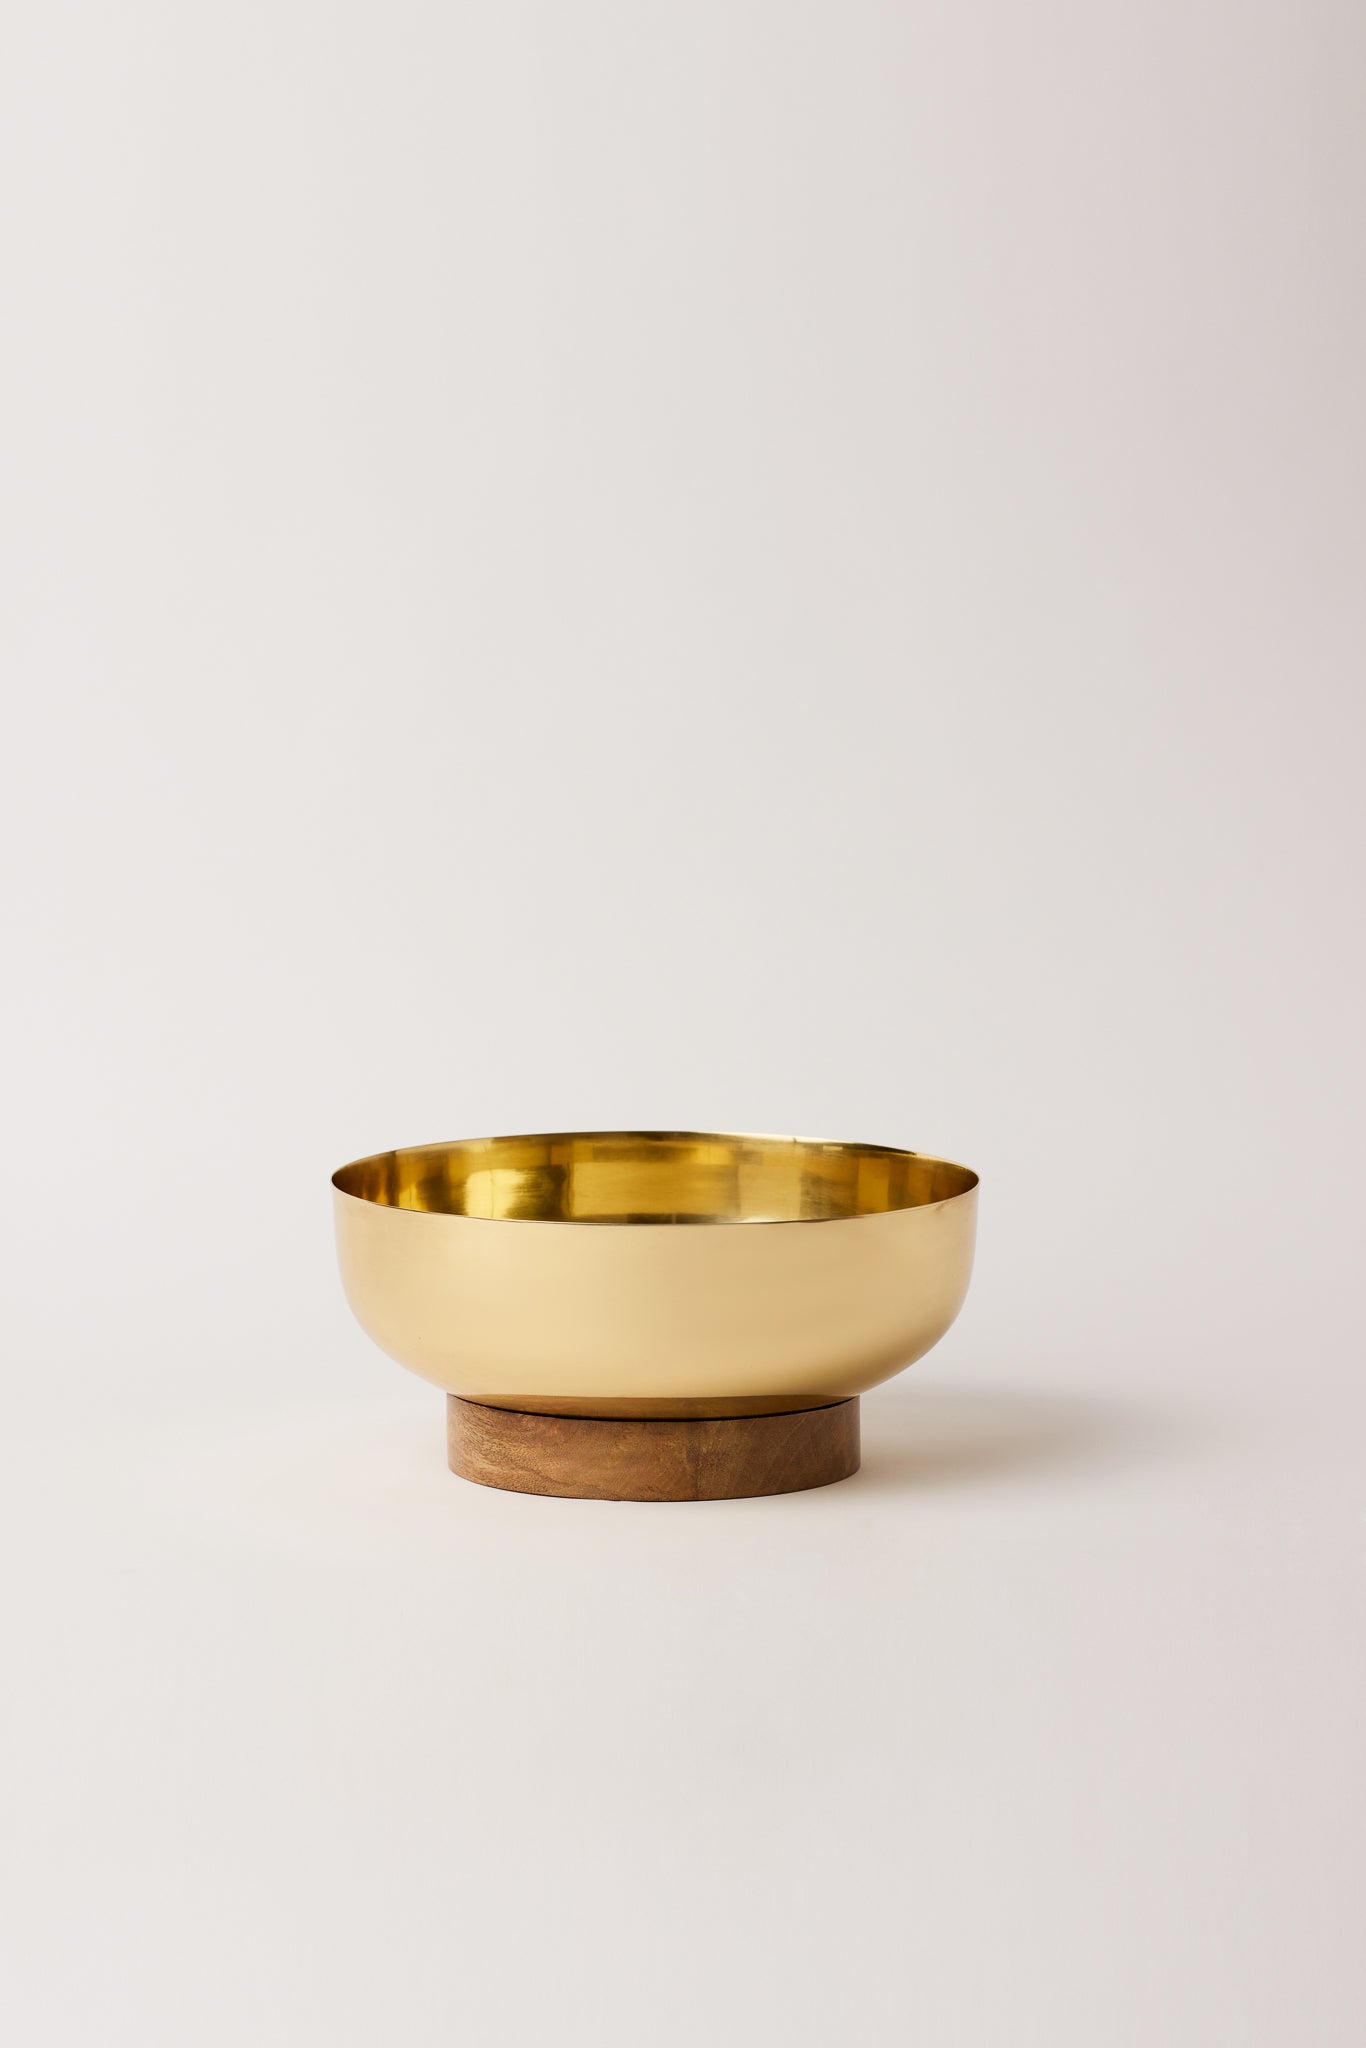 Small Footed Brass Urli With Wood Base - Fleck